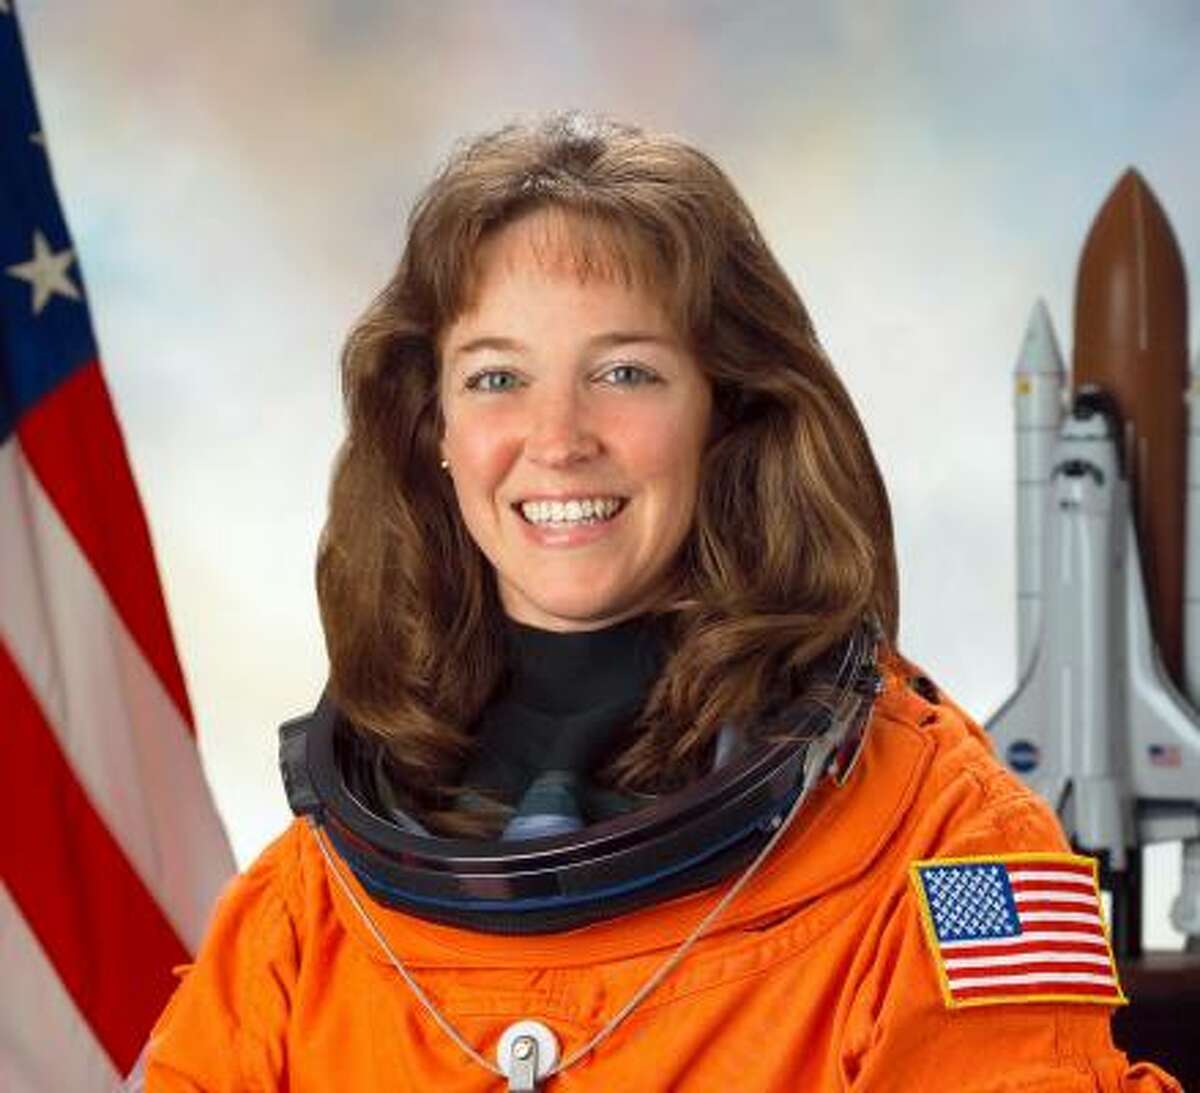 NASA astronaut and U.S. Navy Capt. Lisa Nowak, 43, was arrested Feb. 5 for attempted kidnapping, police said.